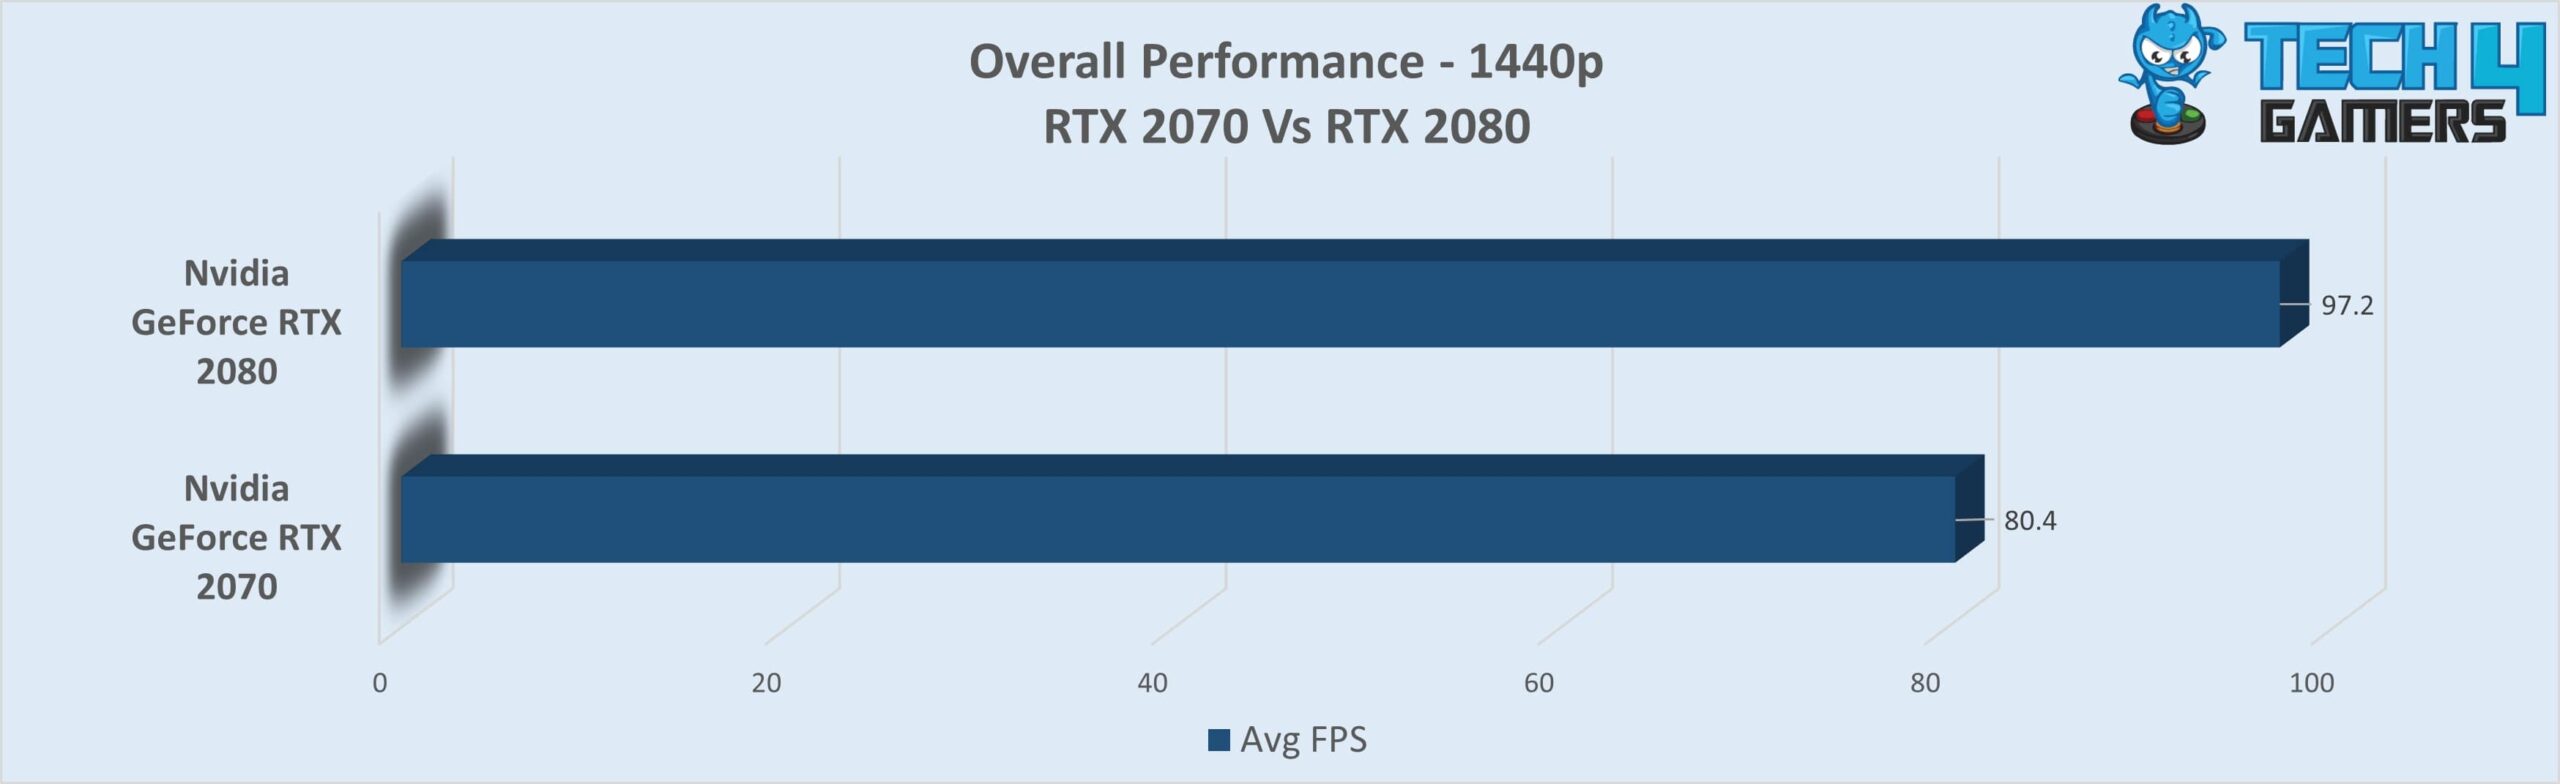 Overall Performance